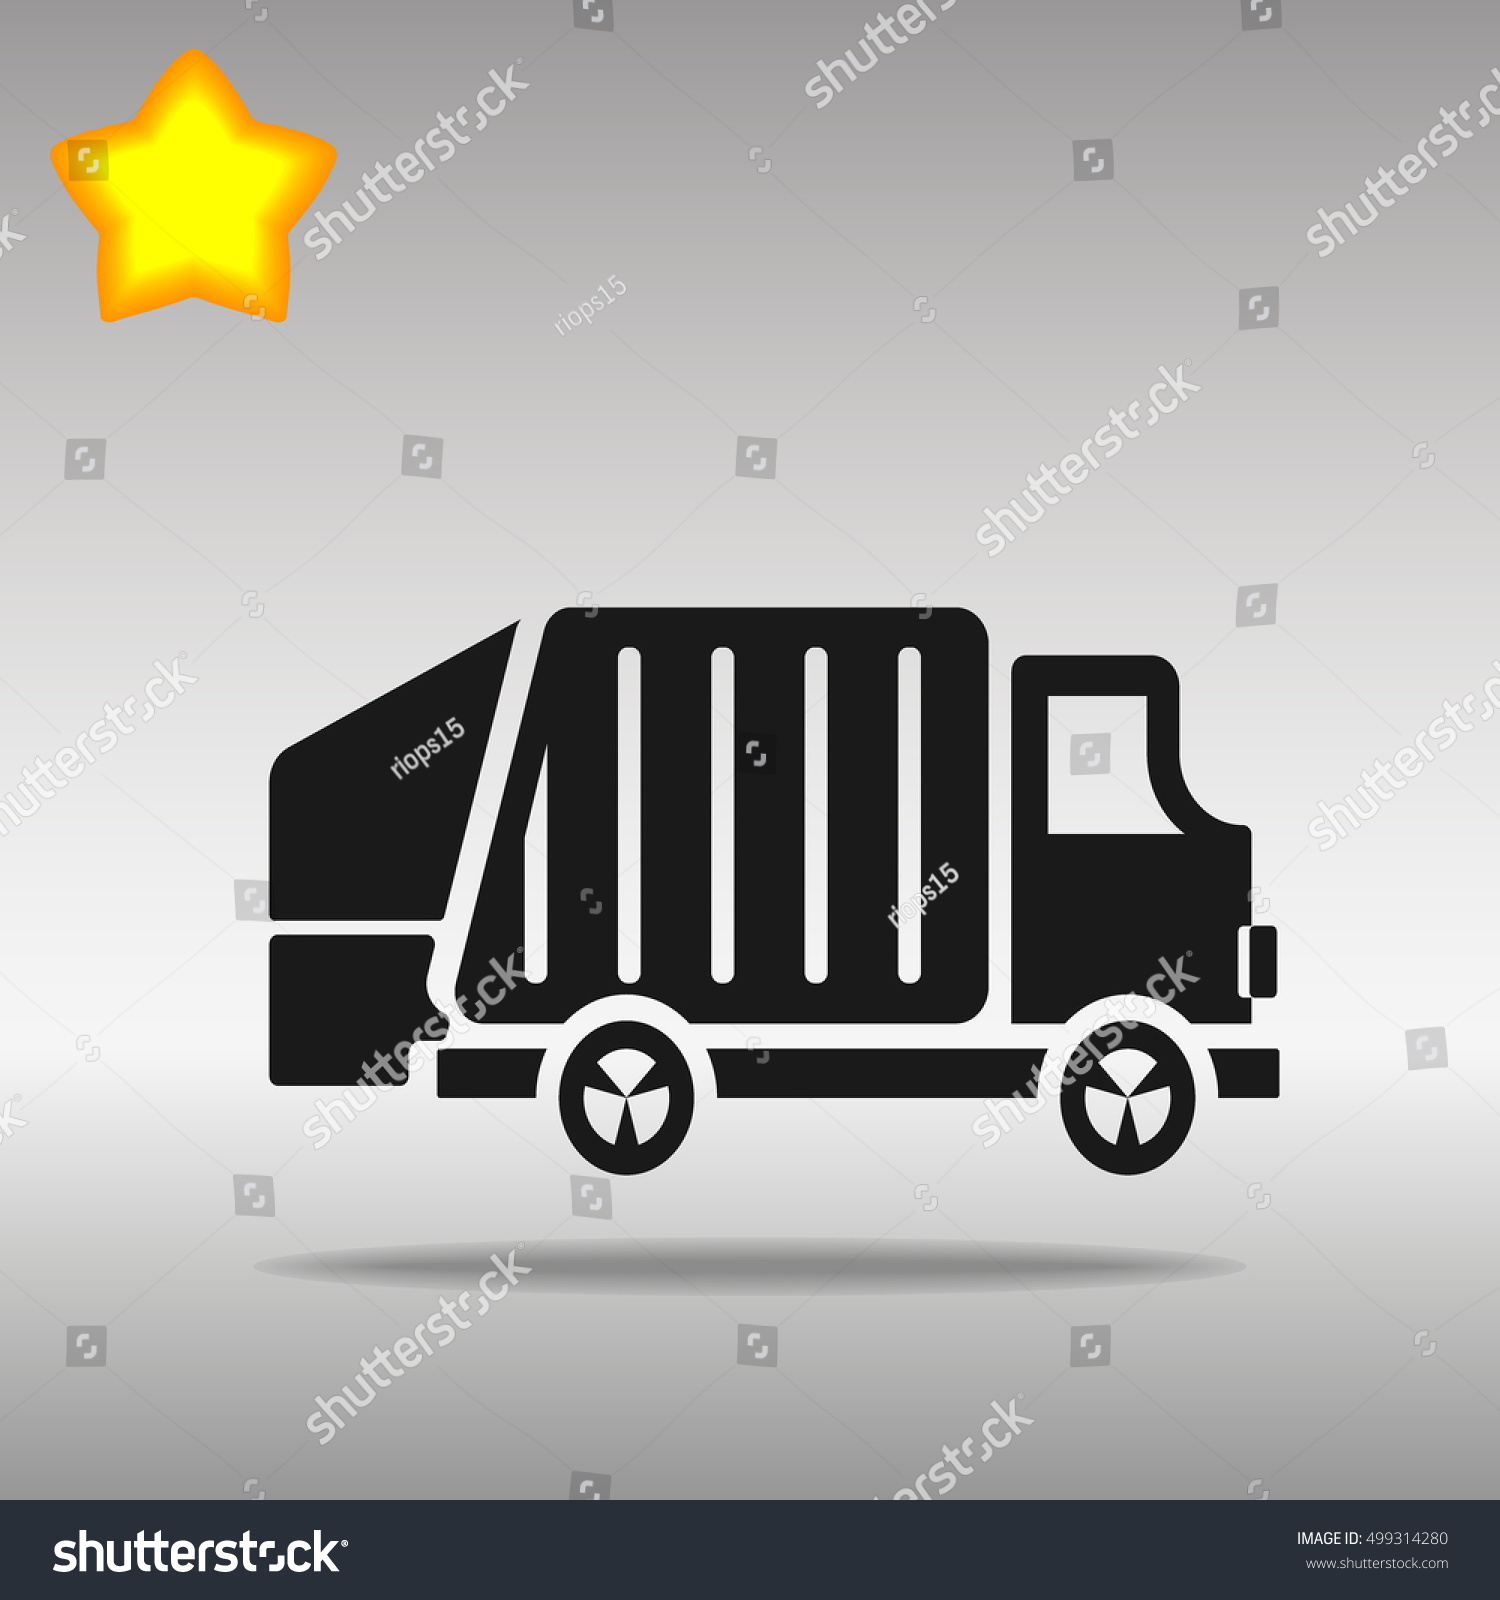 SVG of black garbage truck Icon button logo symbol concept high quality on the gray background svg